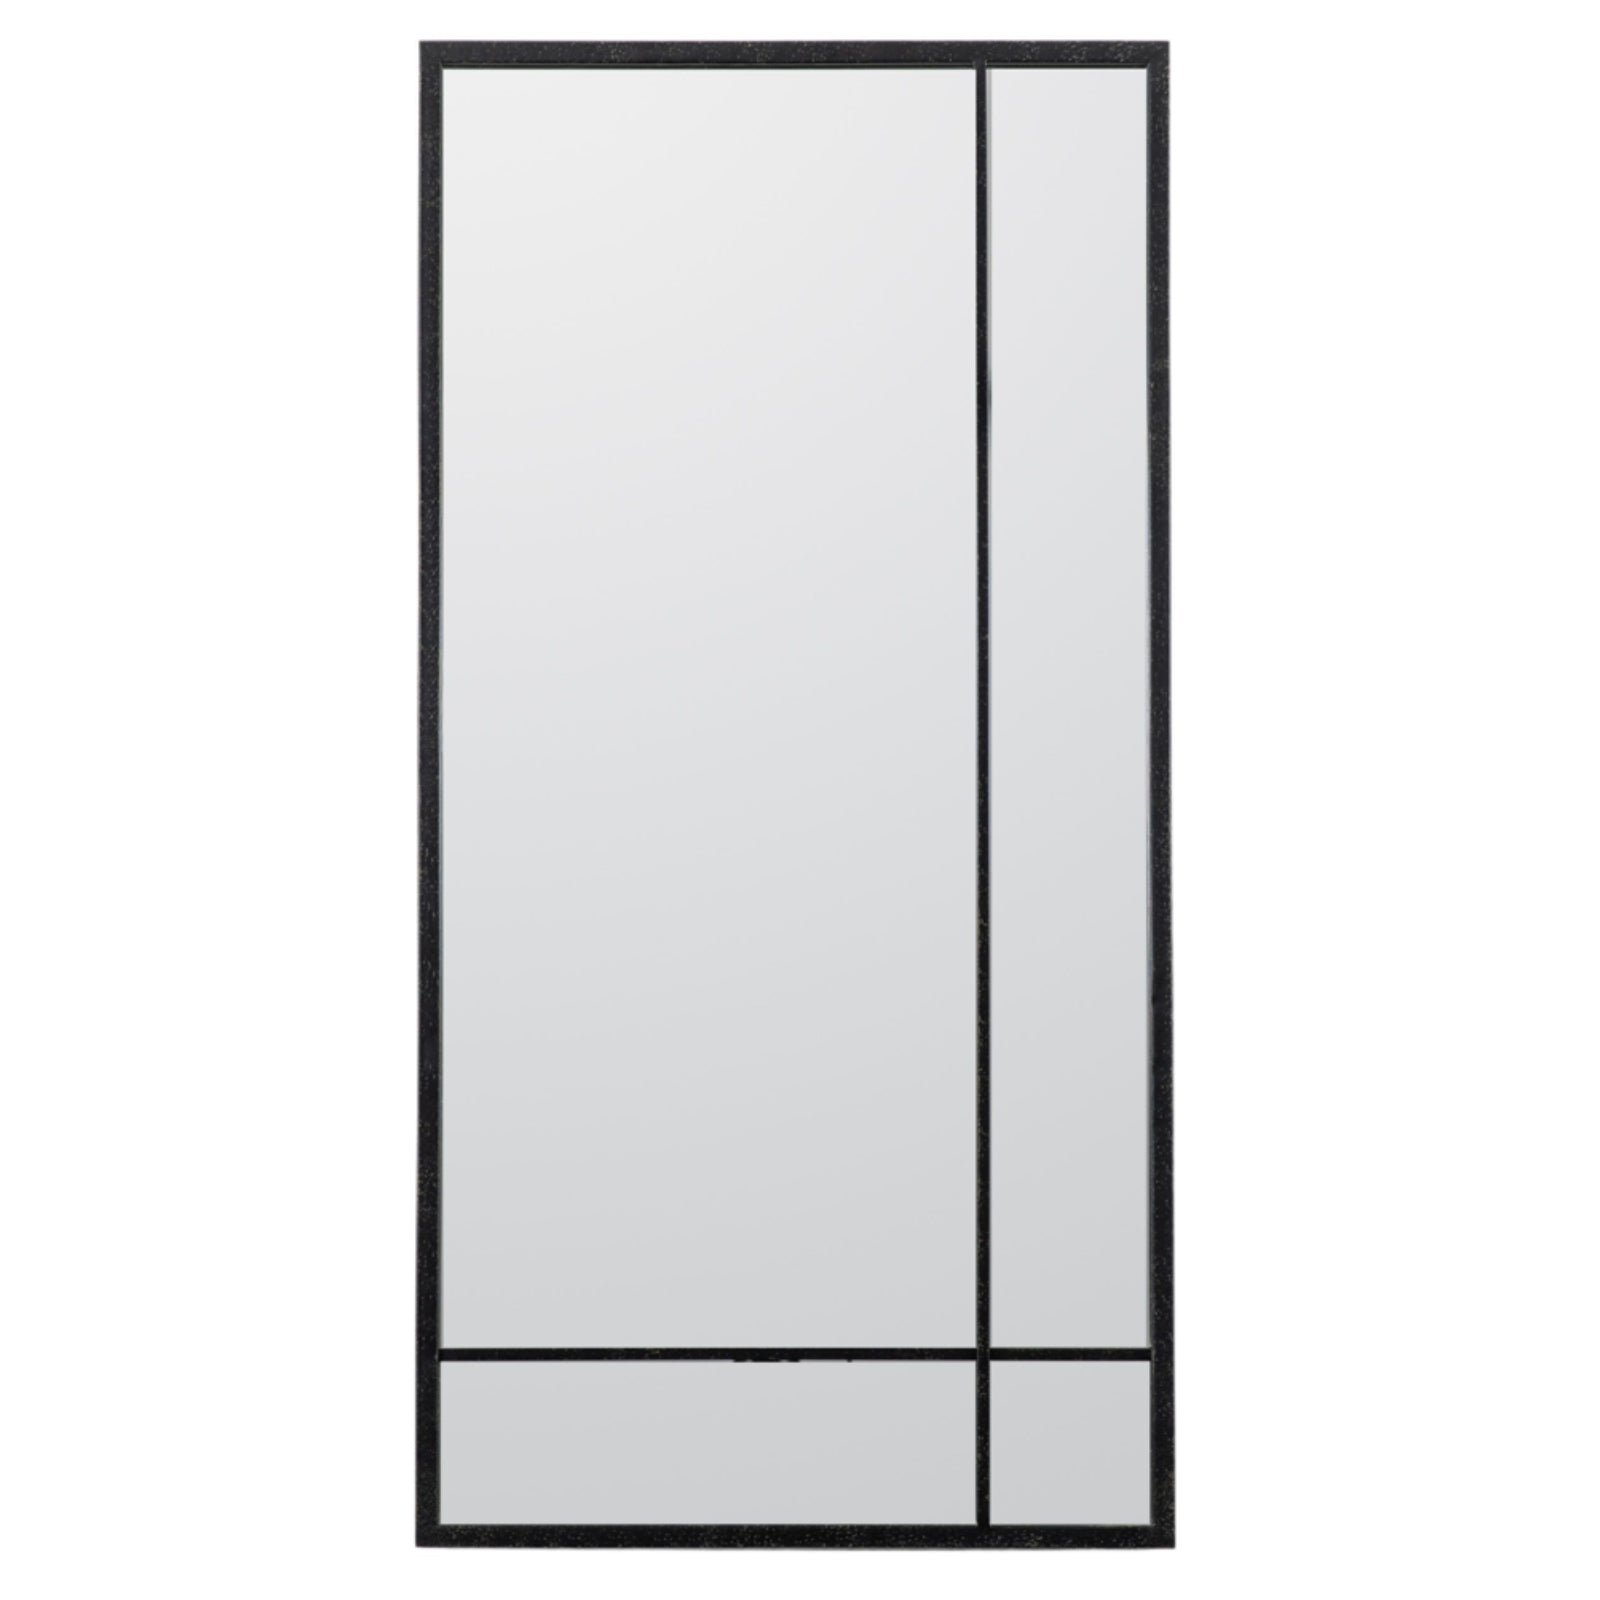 Tall Industrial Portrait Wall Mirror - The Farthing